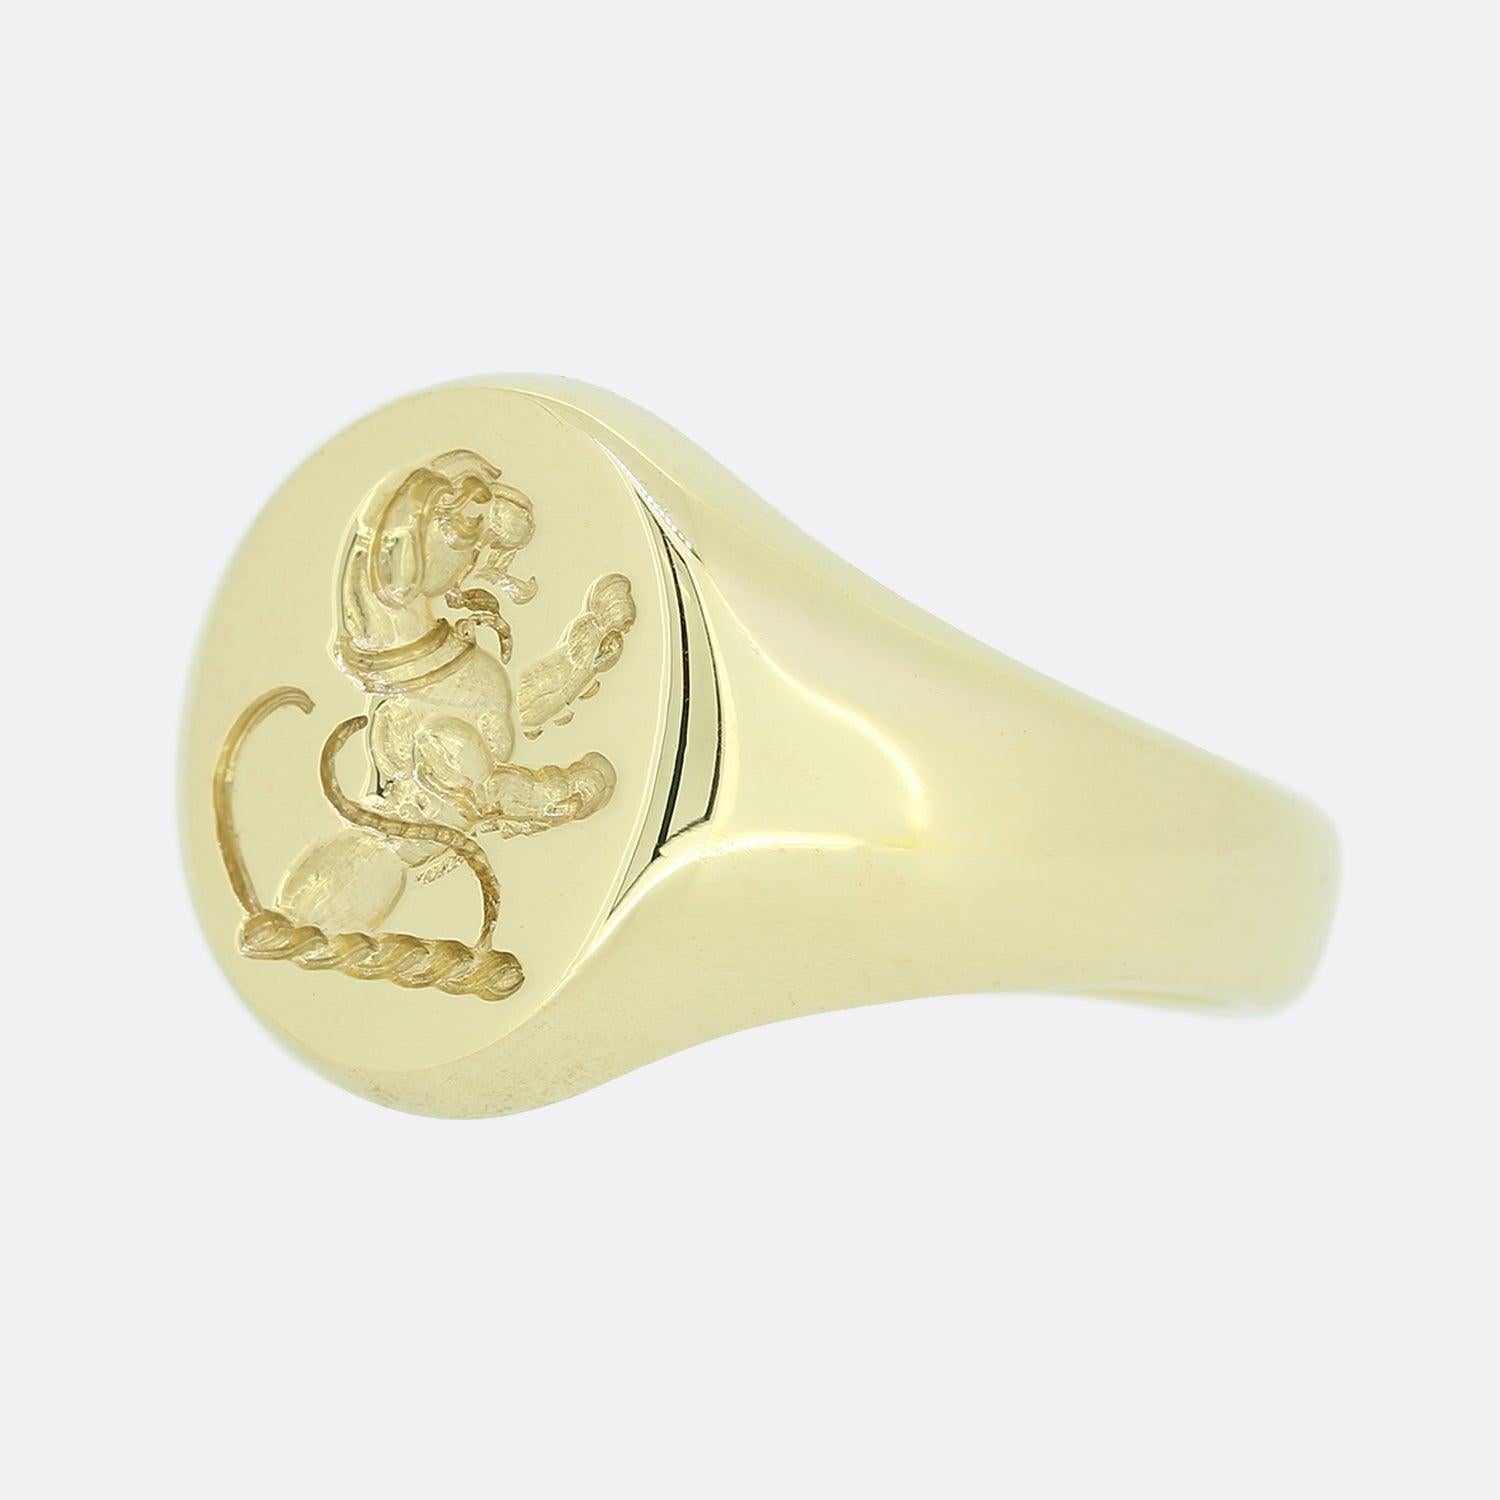 Here we have a 9ct yellow gold oval shaped signet ring. The piece features a finely detailed deep intaglio of a marauding lion whilst the shoulders and band of the ring remain polished and unembellished. 

Condition: Used (Very Good)
Weight: 8.3